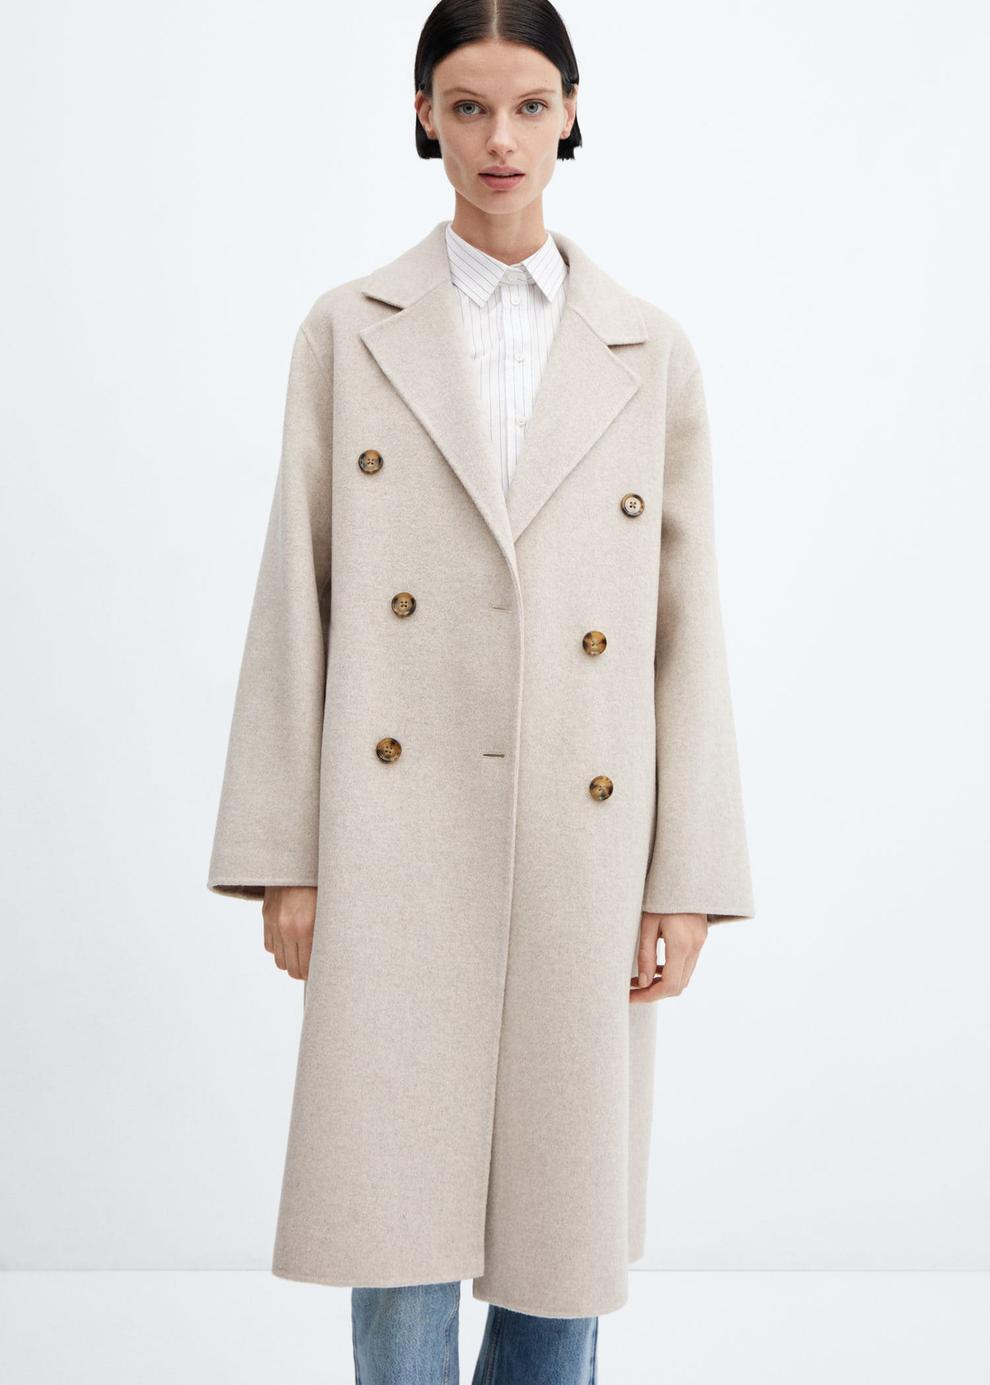 Handmade oversized wool coat offers at S$ 199.9 in Mango